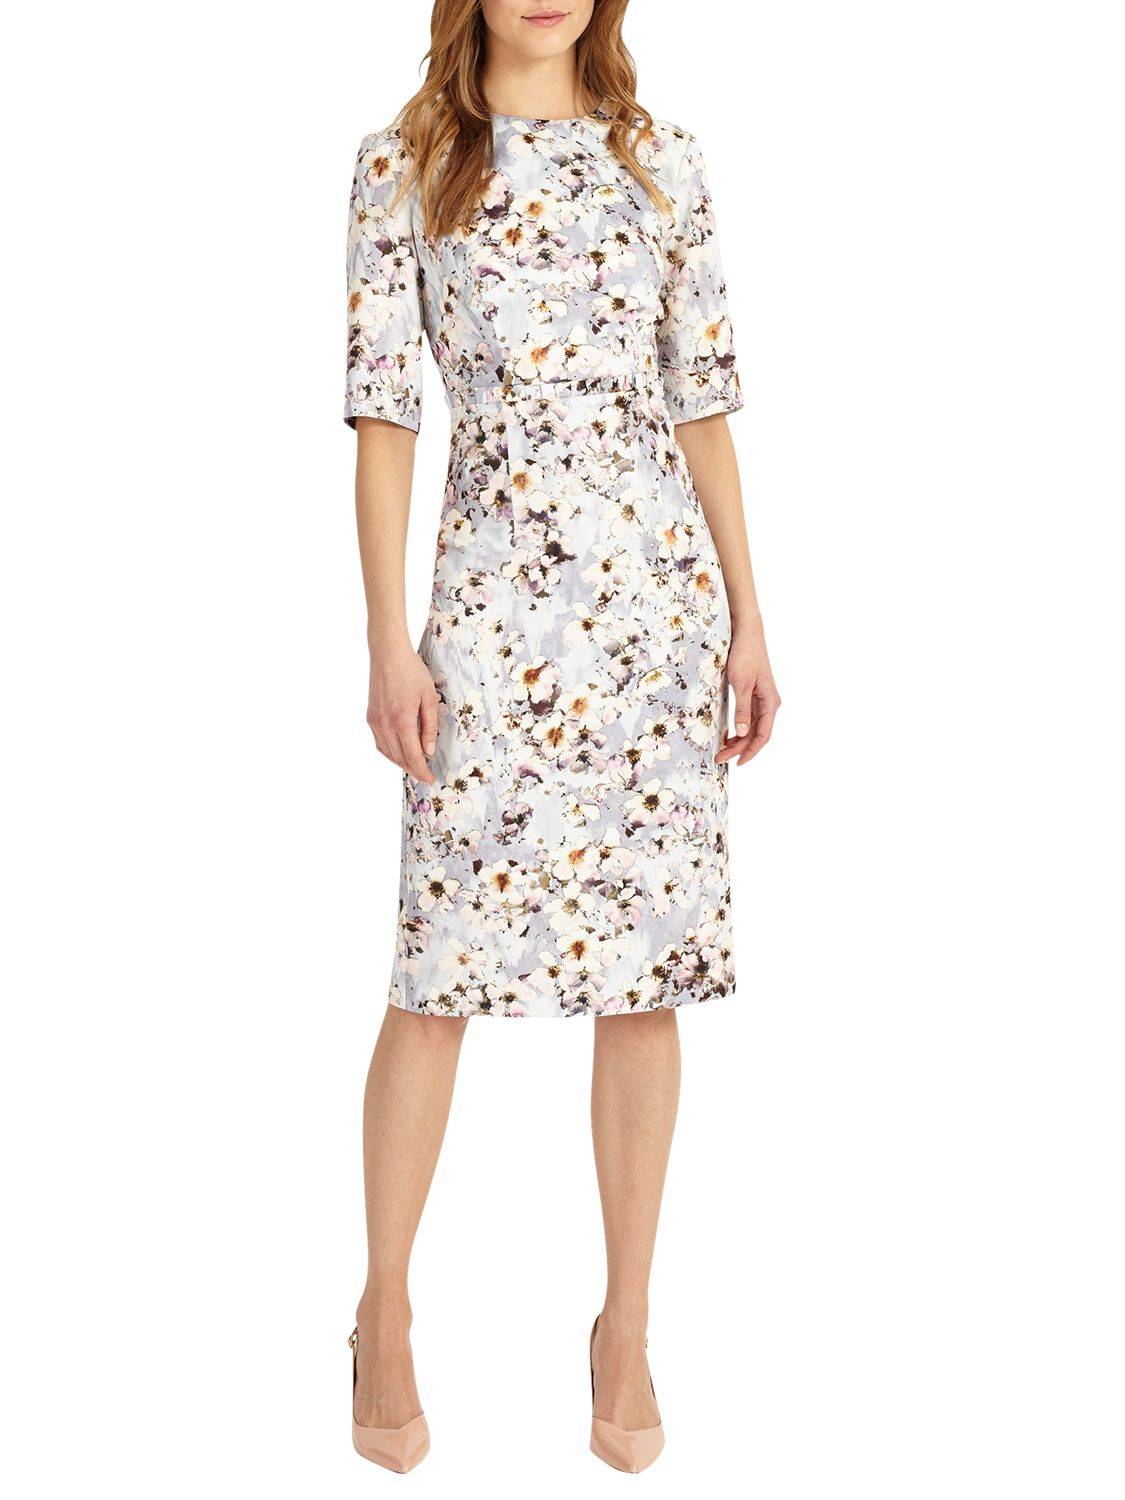 Phase Eight Ember Floral Print Dress, Mineral, 14